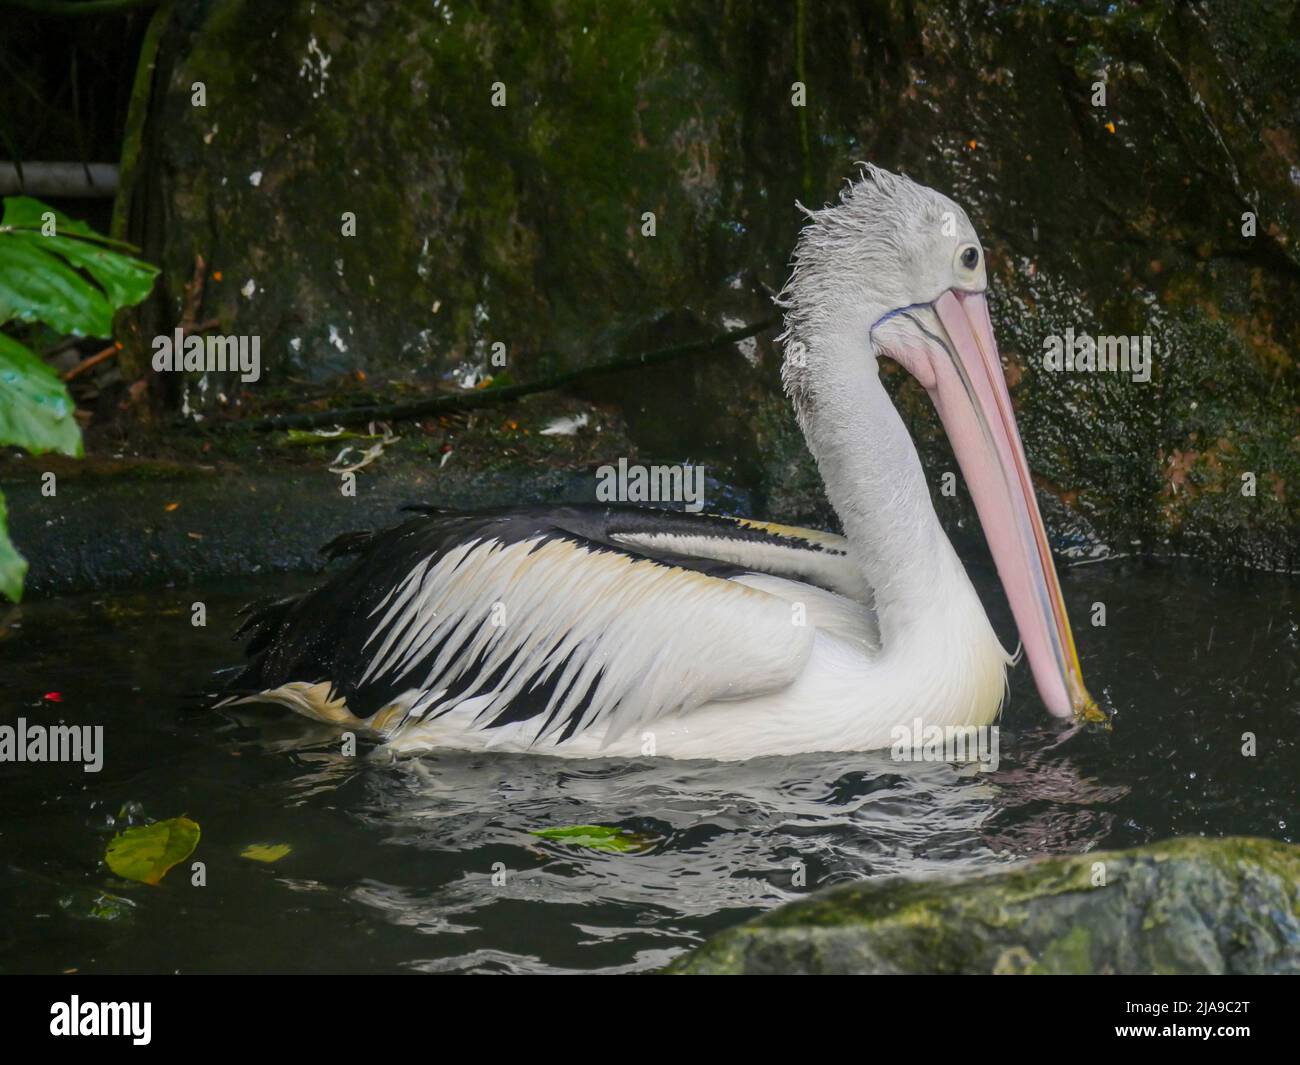 Pelican, Large water birds swimming in Water pond Stock Photo